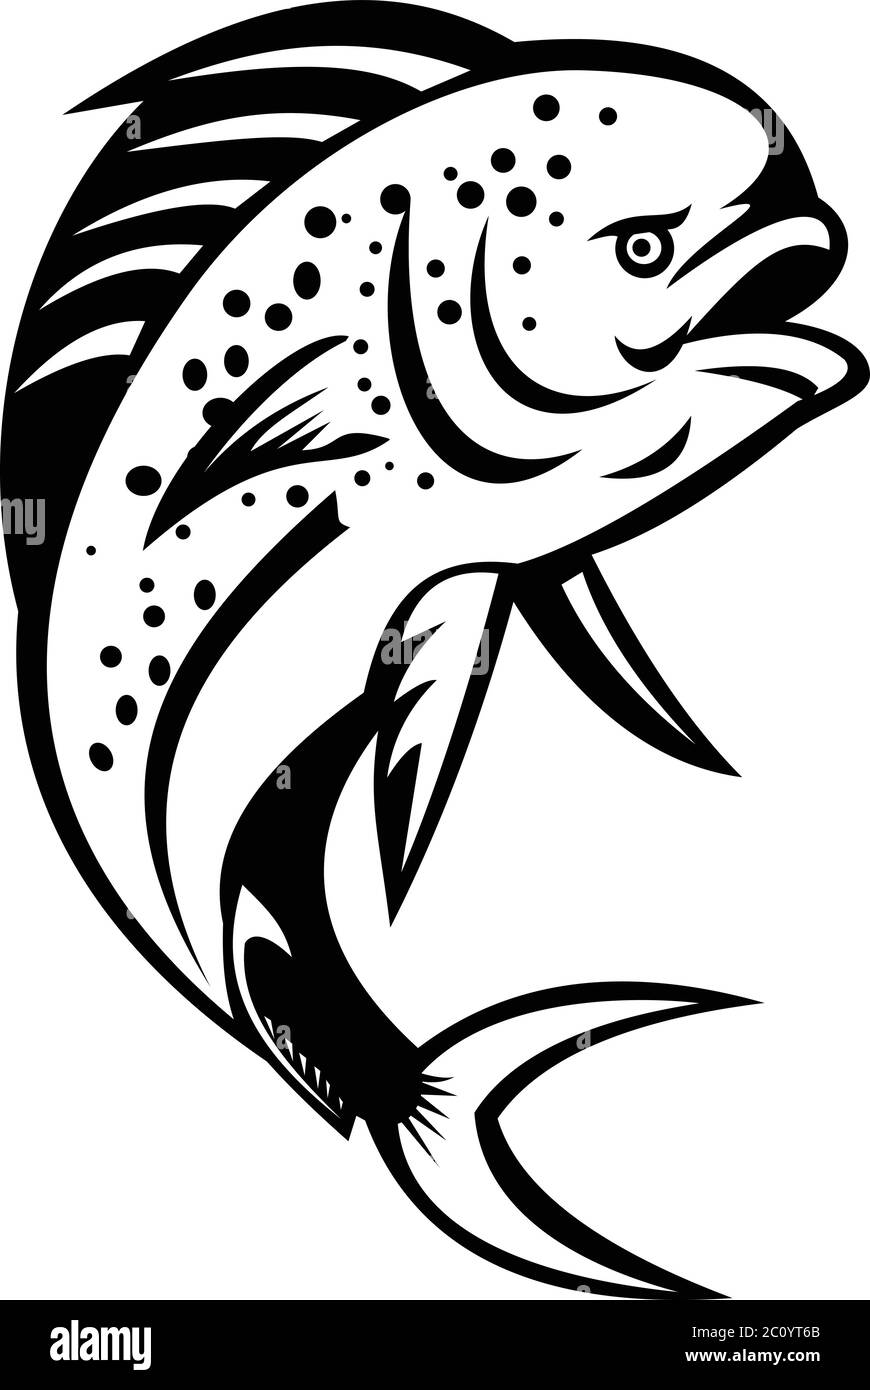 Pompano Dolphinfish Jumping Up With Fishing Boat in Background Retro Svg-Pompano SVG-Pompano Dolphinfish Jumping Cut File-DXF-jpg-png